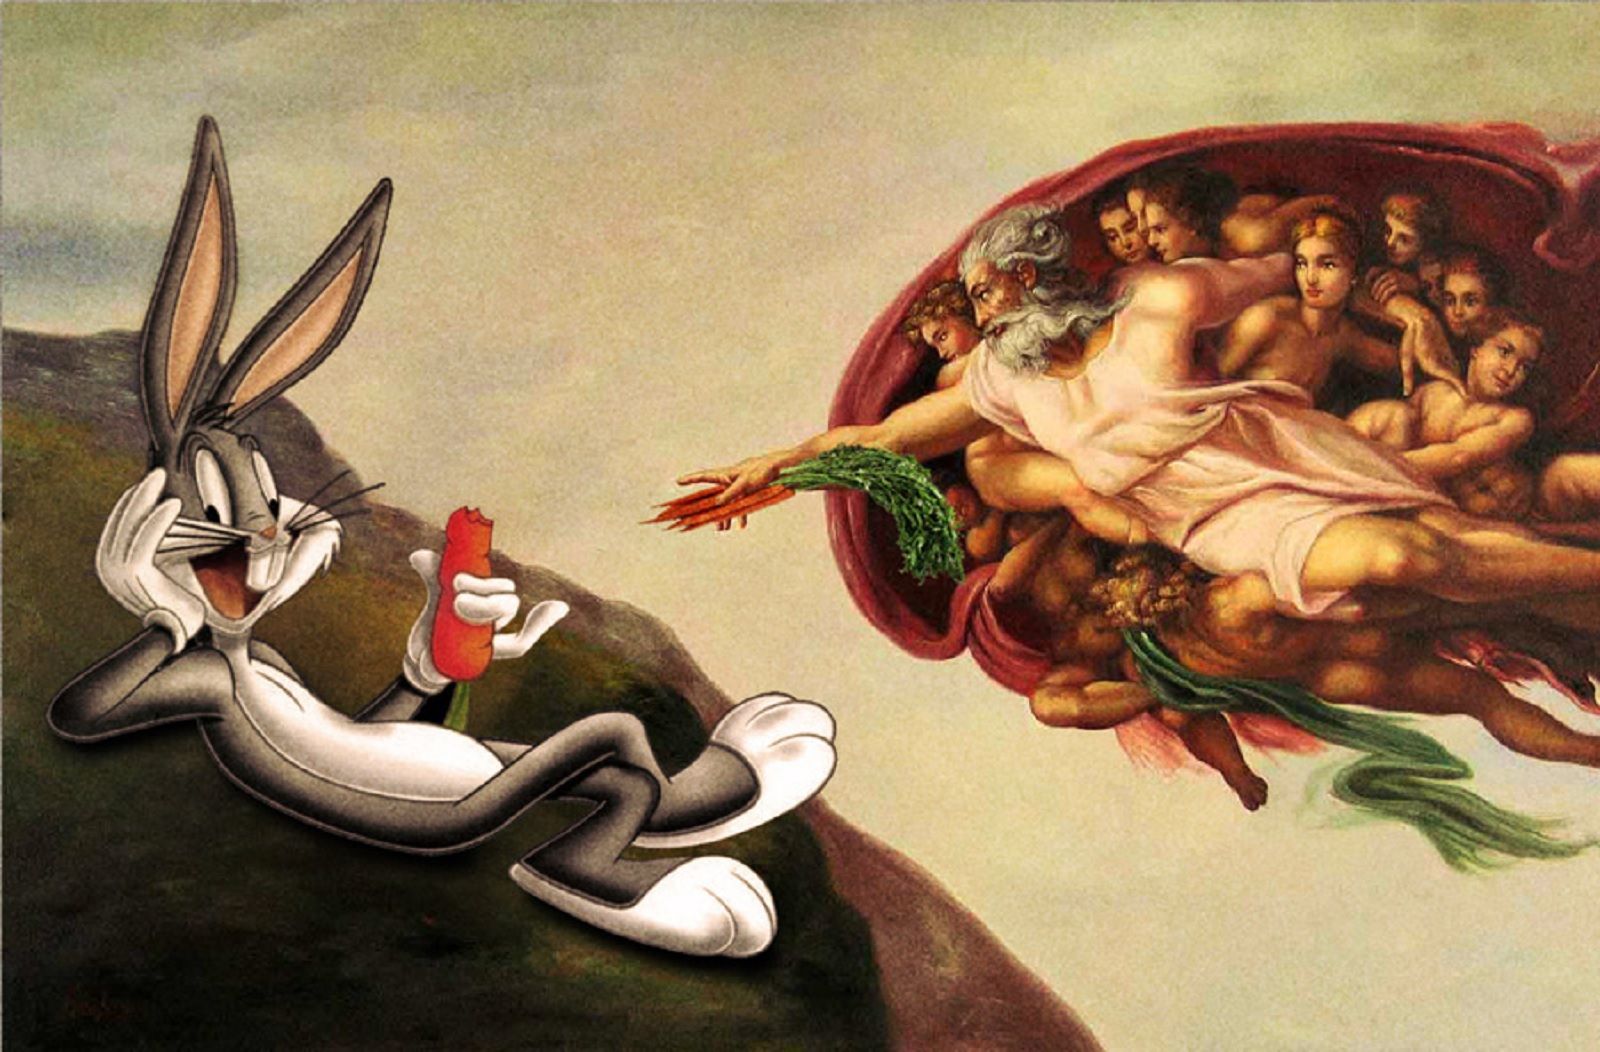 Amusing Images Of Cartoon Characters In Photoshopped Into Renaissance Paintings image 16